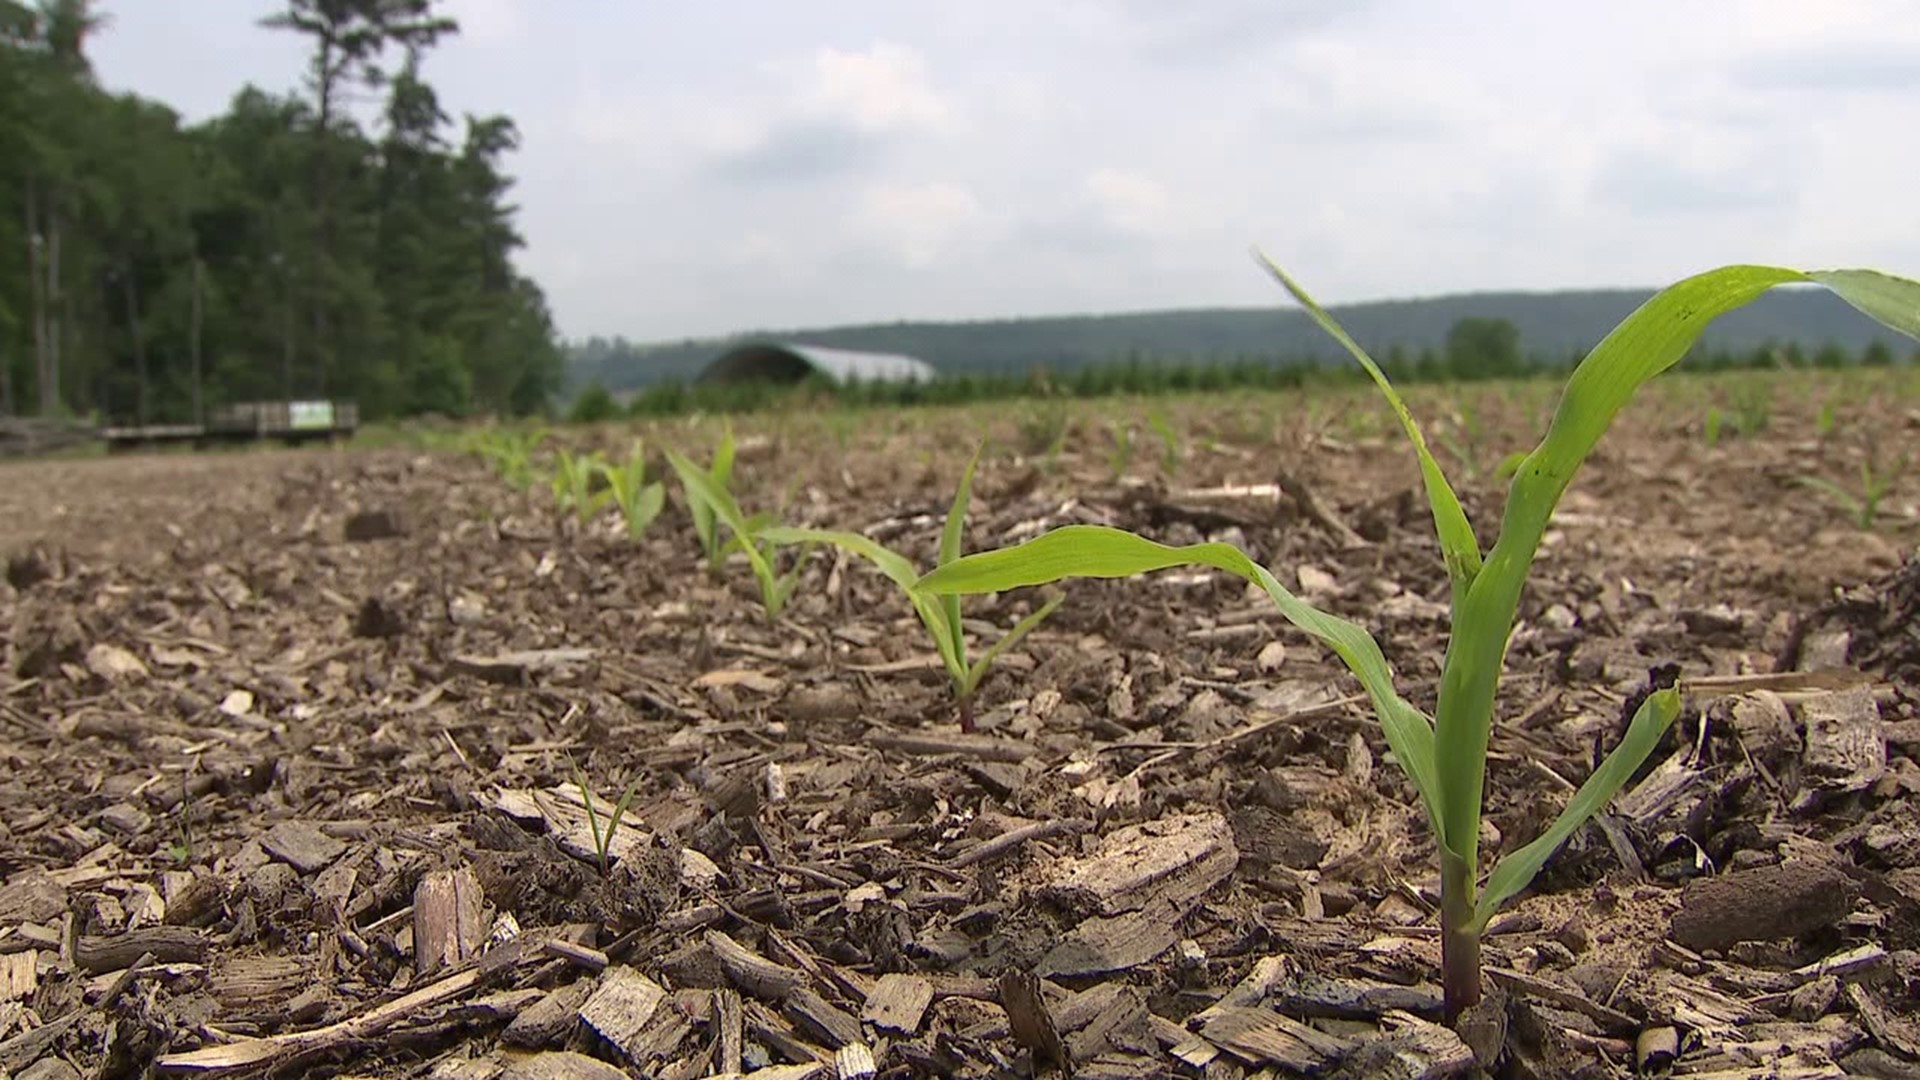 Farmers say if not for the recent rain, not only would they have lost crops, but it would have set the growth of most plants back.